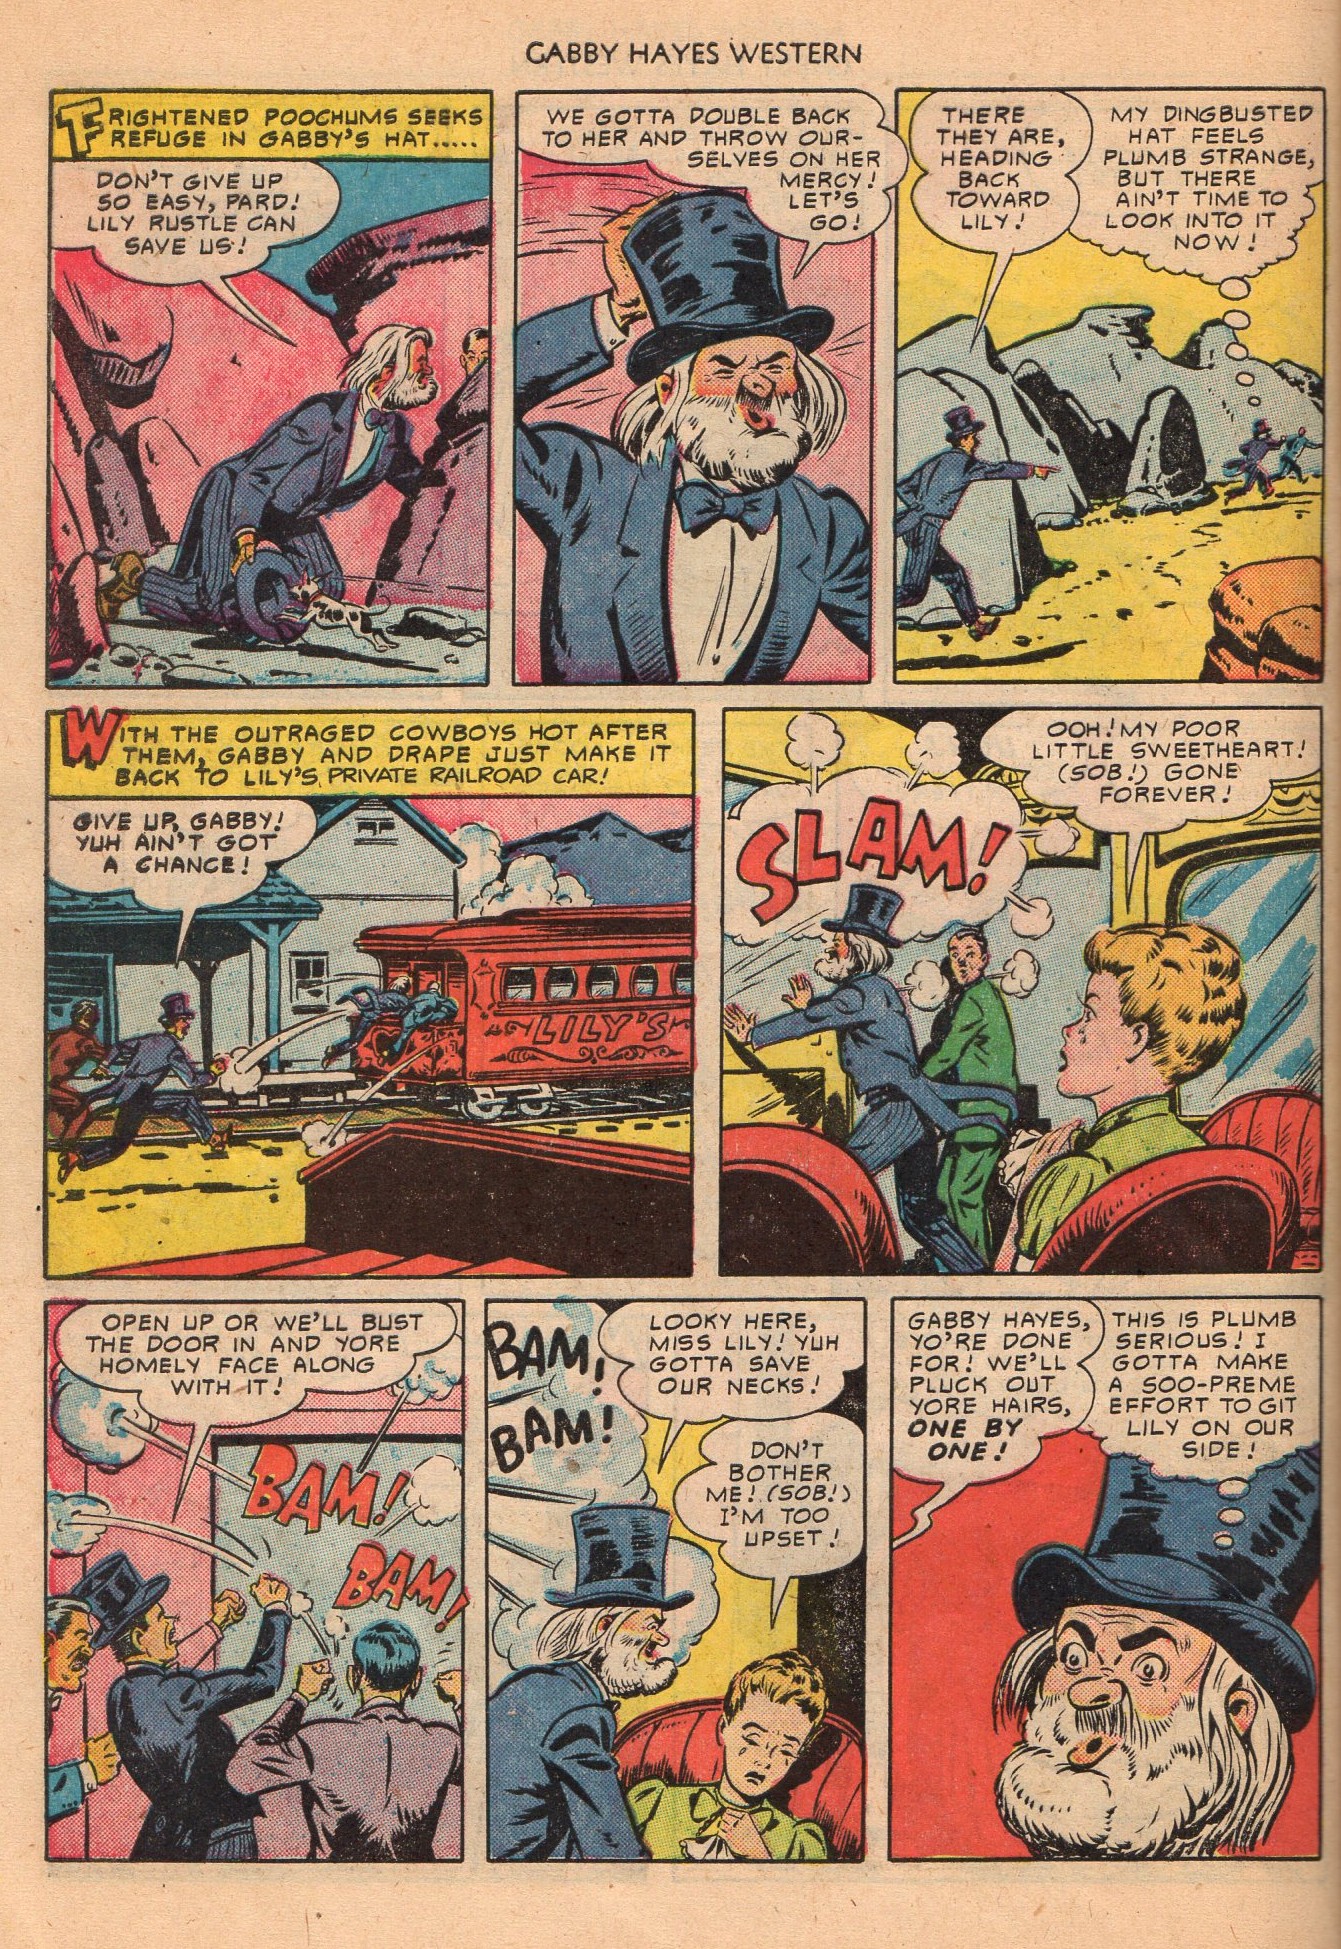 Read online Gabby Hayes Western comic -  Issue #21 - 32